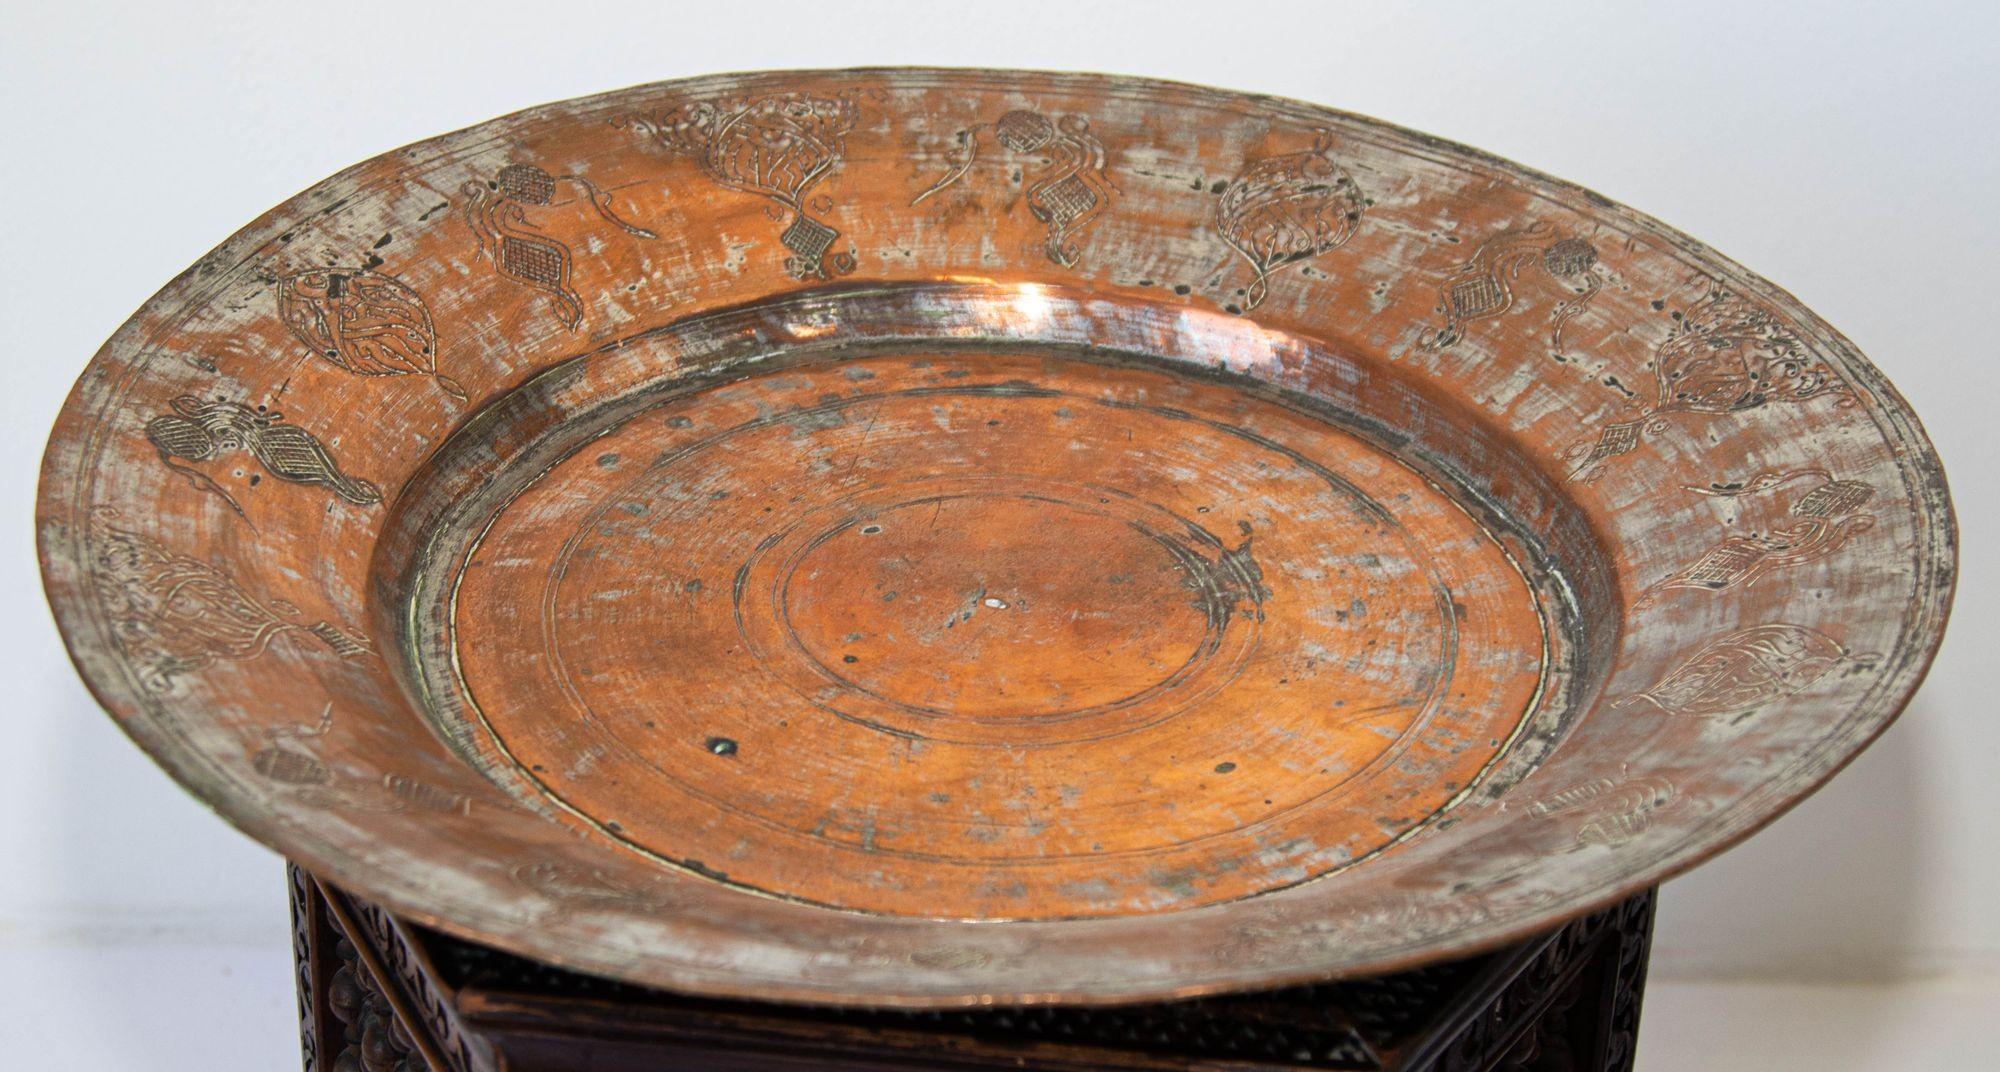 Large Antique Tinned Copper Rajasthani Vessel Bowl 11